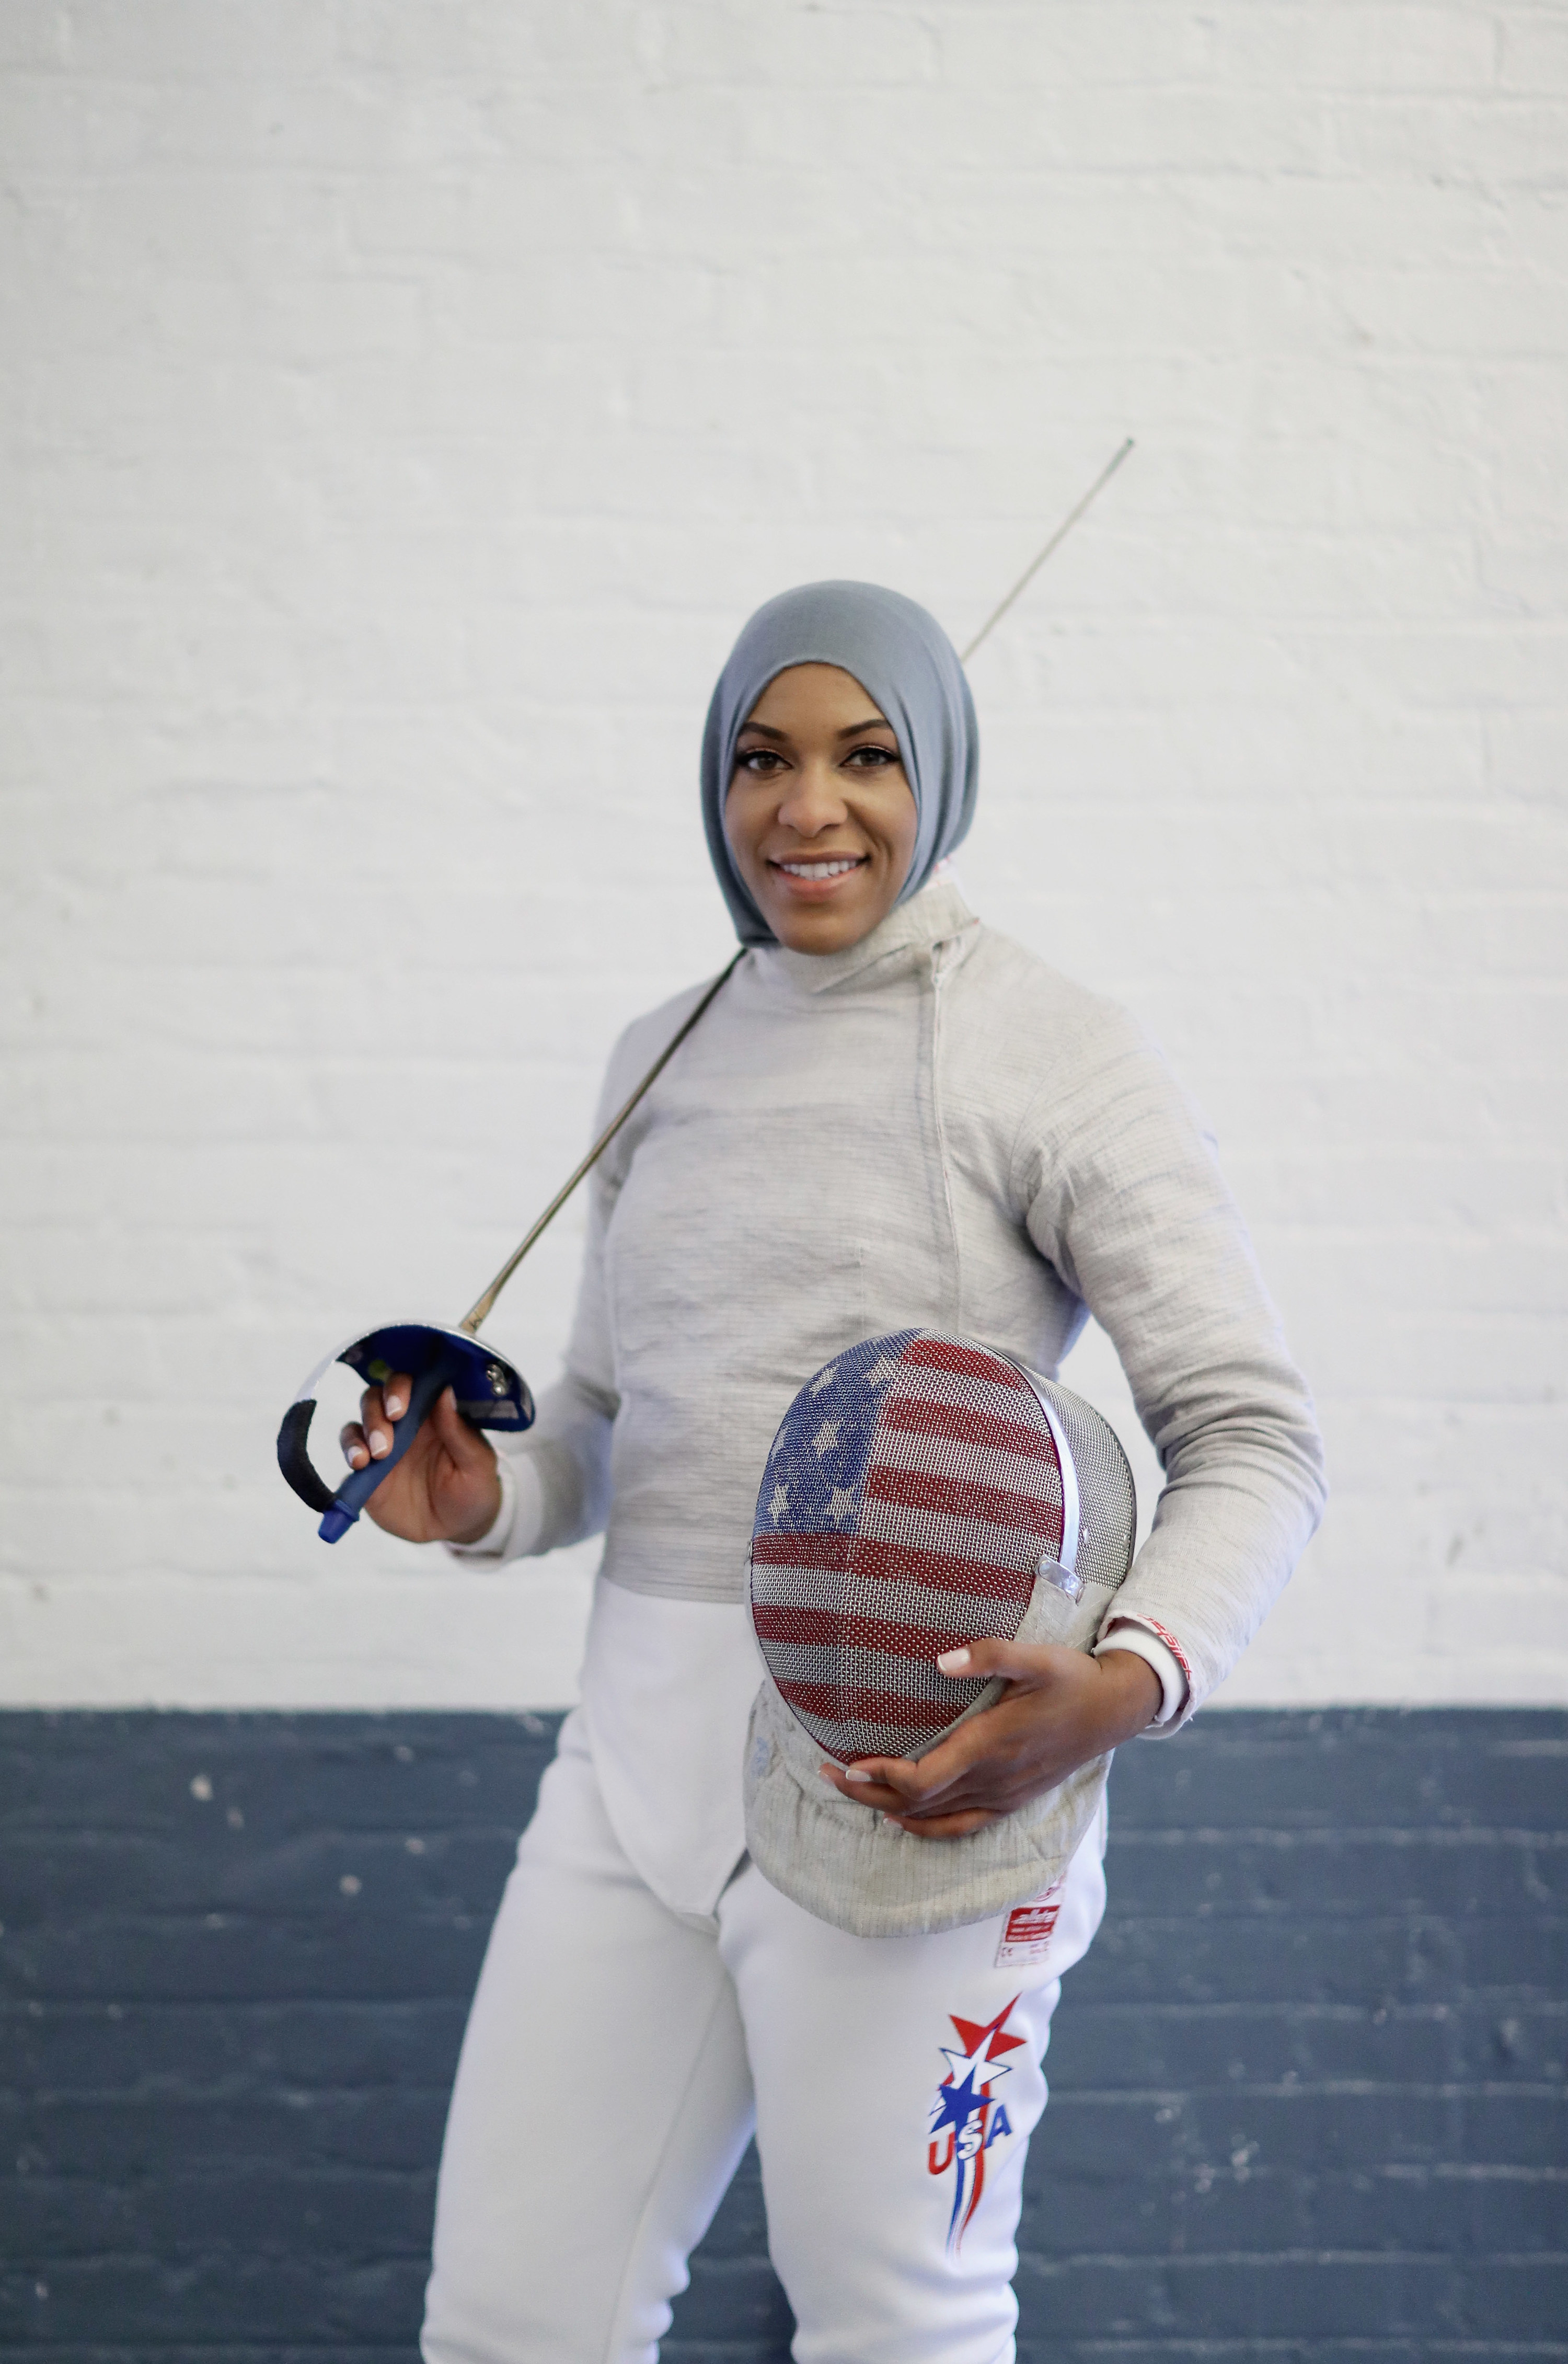 American Olympic fencer Ibtihaj Muhammad poses for a portrait at the Fencers Club. She holds her helmet, which has the U.S. flag printed on the mesh, and her fencing sabre.